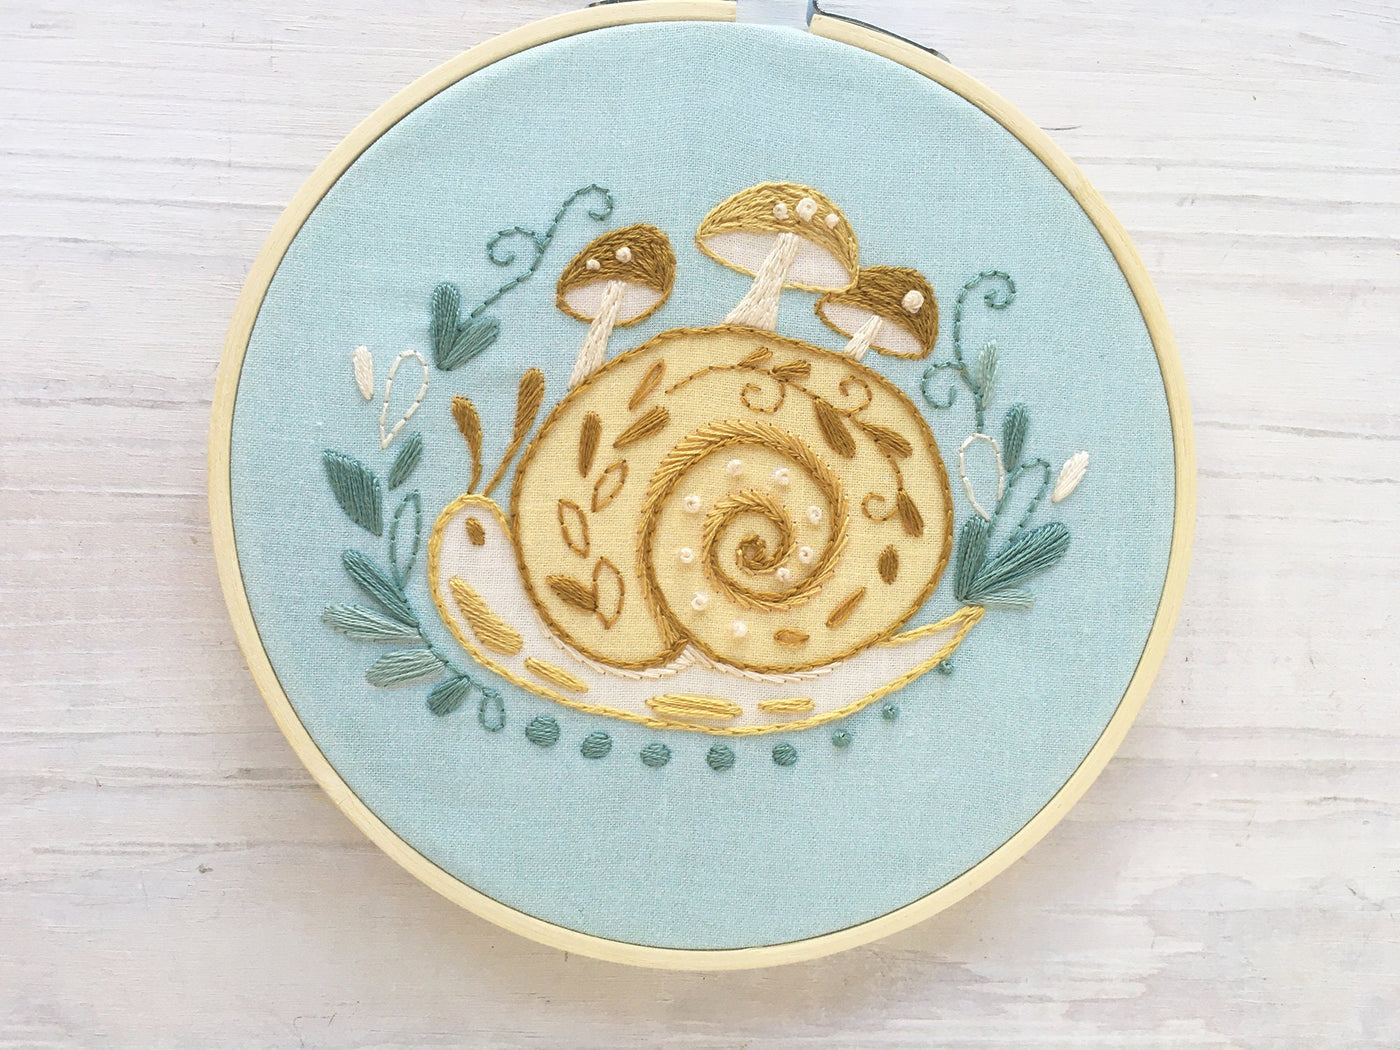 Mushroom Snail Hand Embroidery pattern download